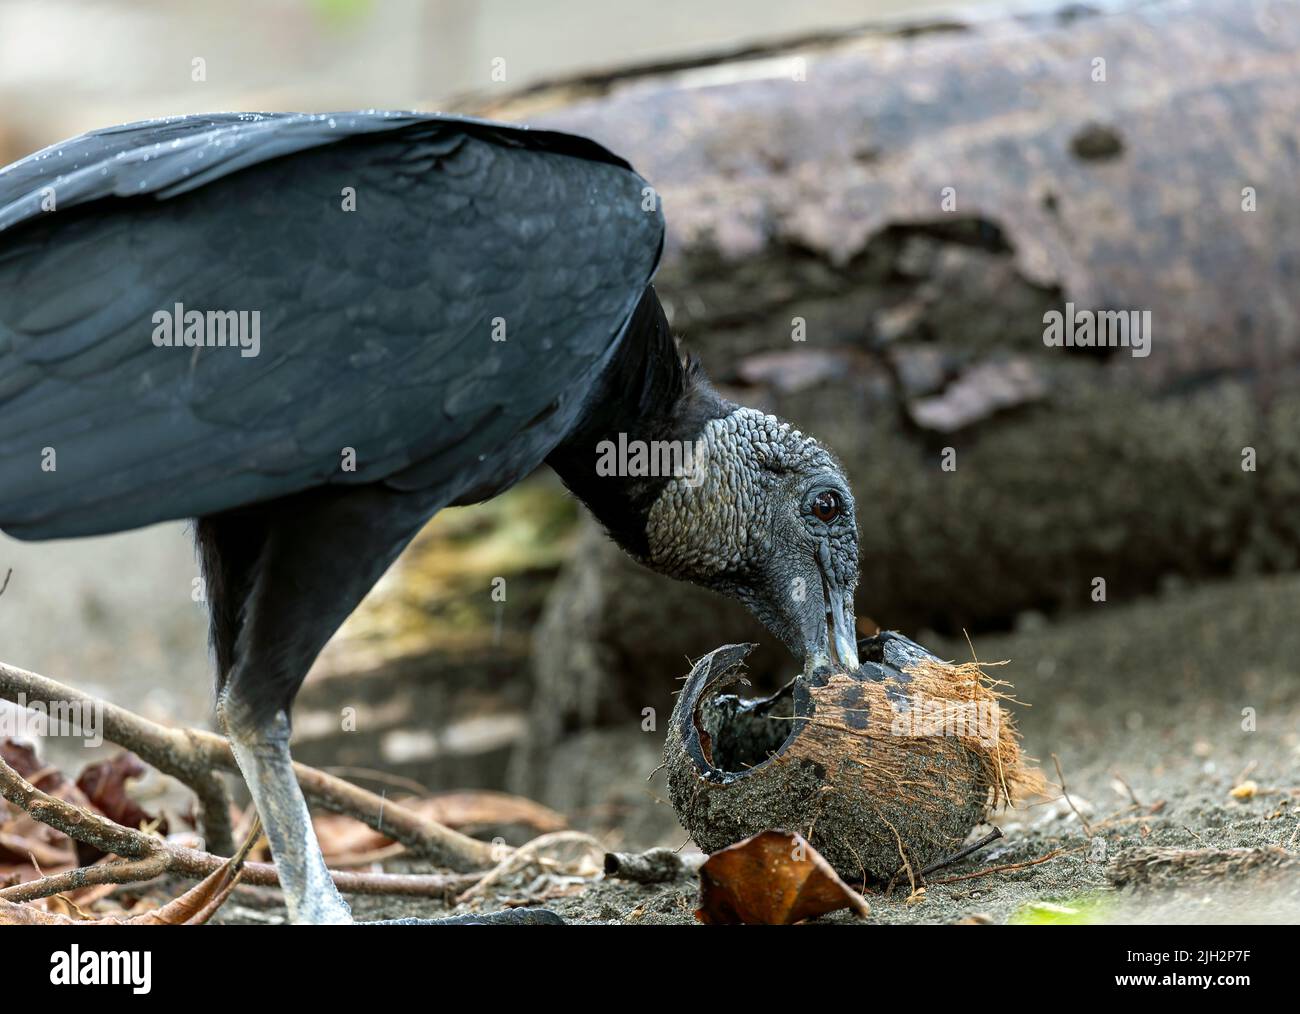 Black vulture scavenging on beach in Costa Rica Stock Photo